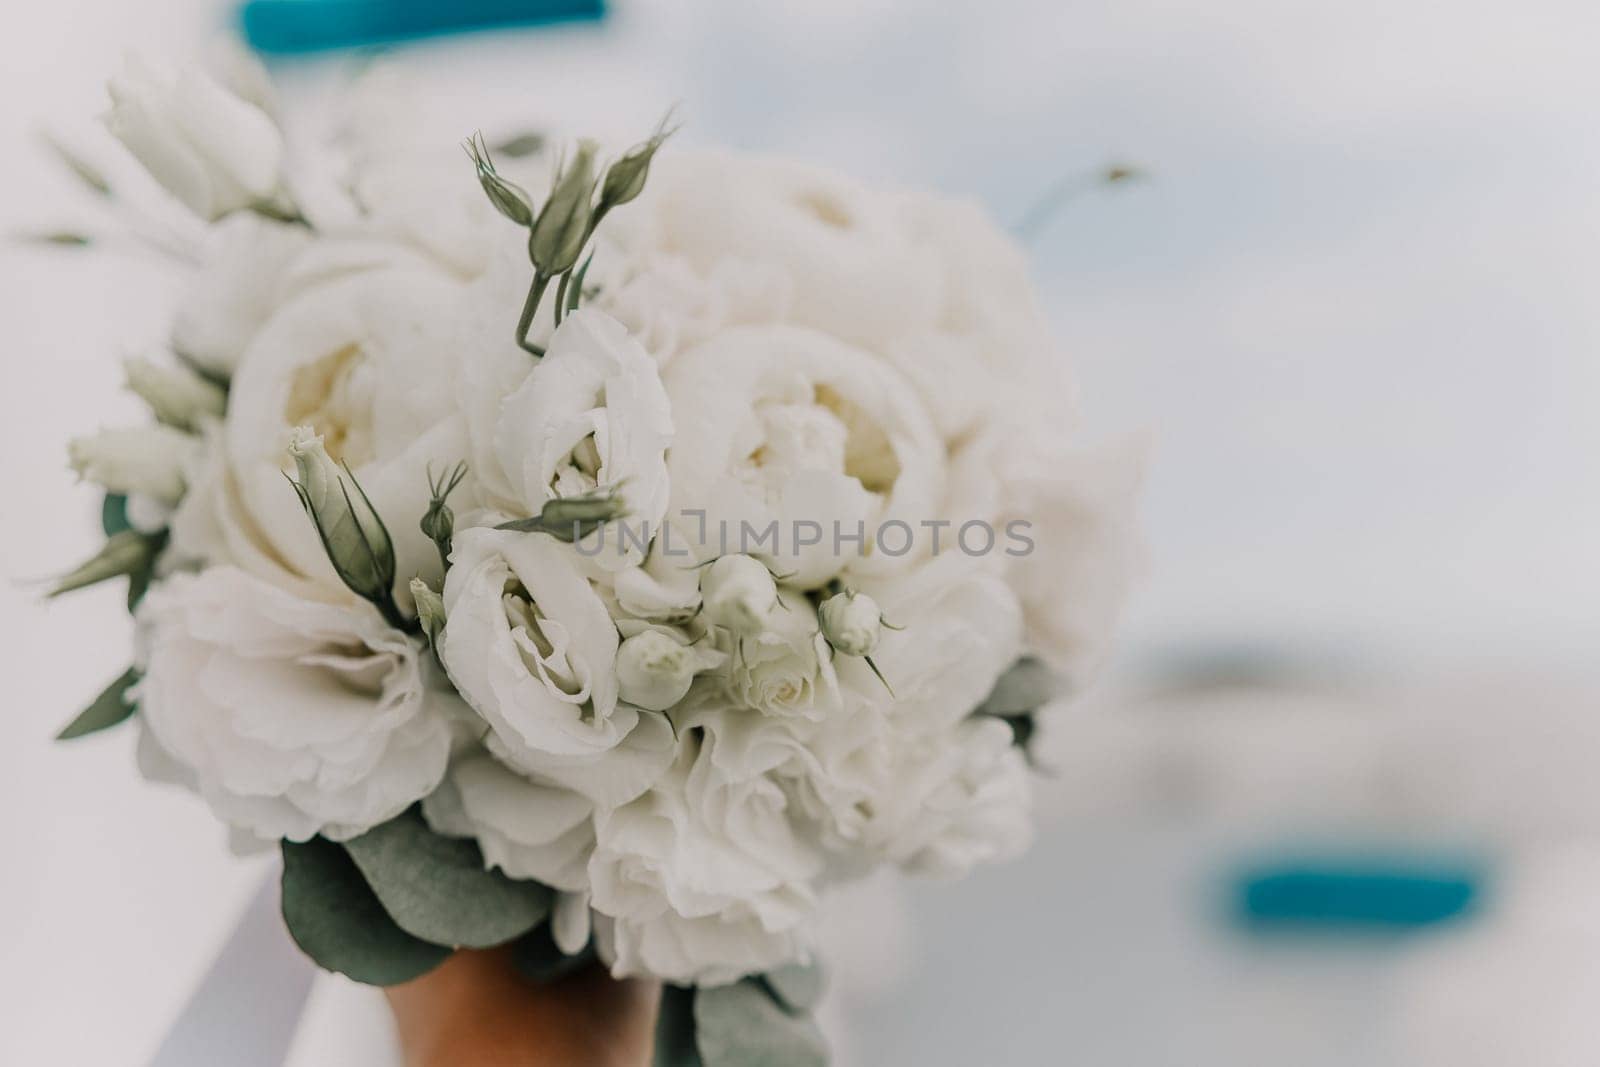 A bouquet of white flowers is being held by a person. The flowers are arranged in a way that they look like they are in a vase. The bouquet is the main focus of the image. by Matiunina